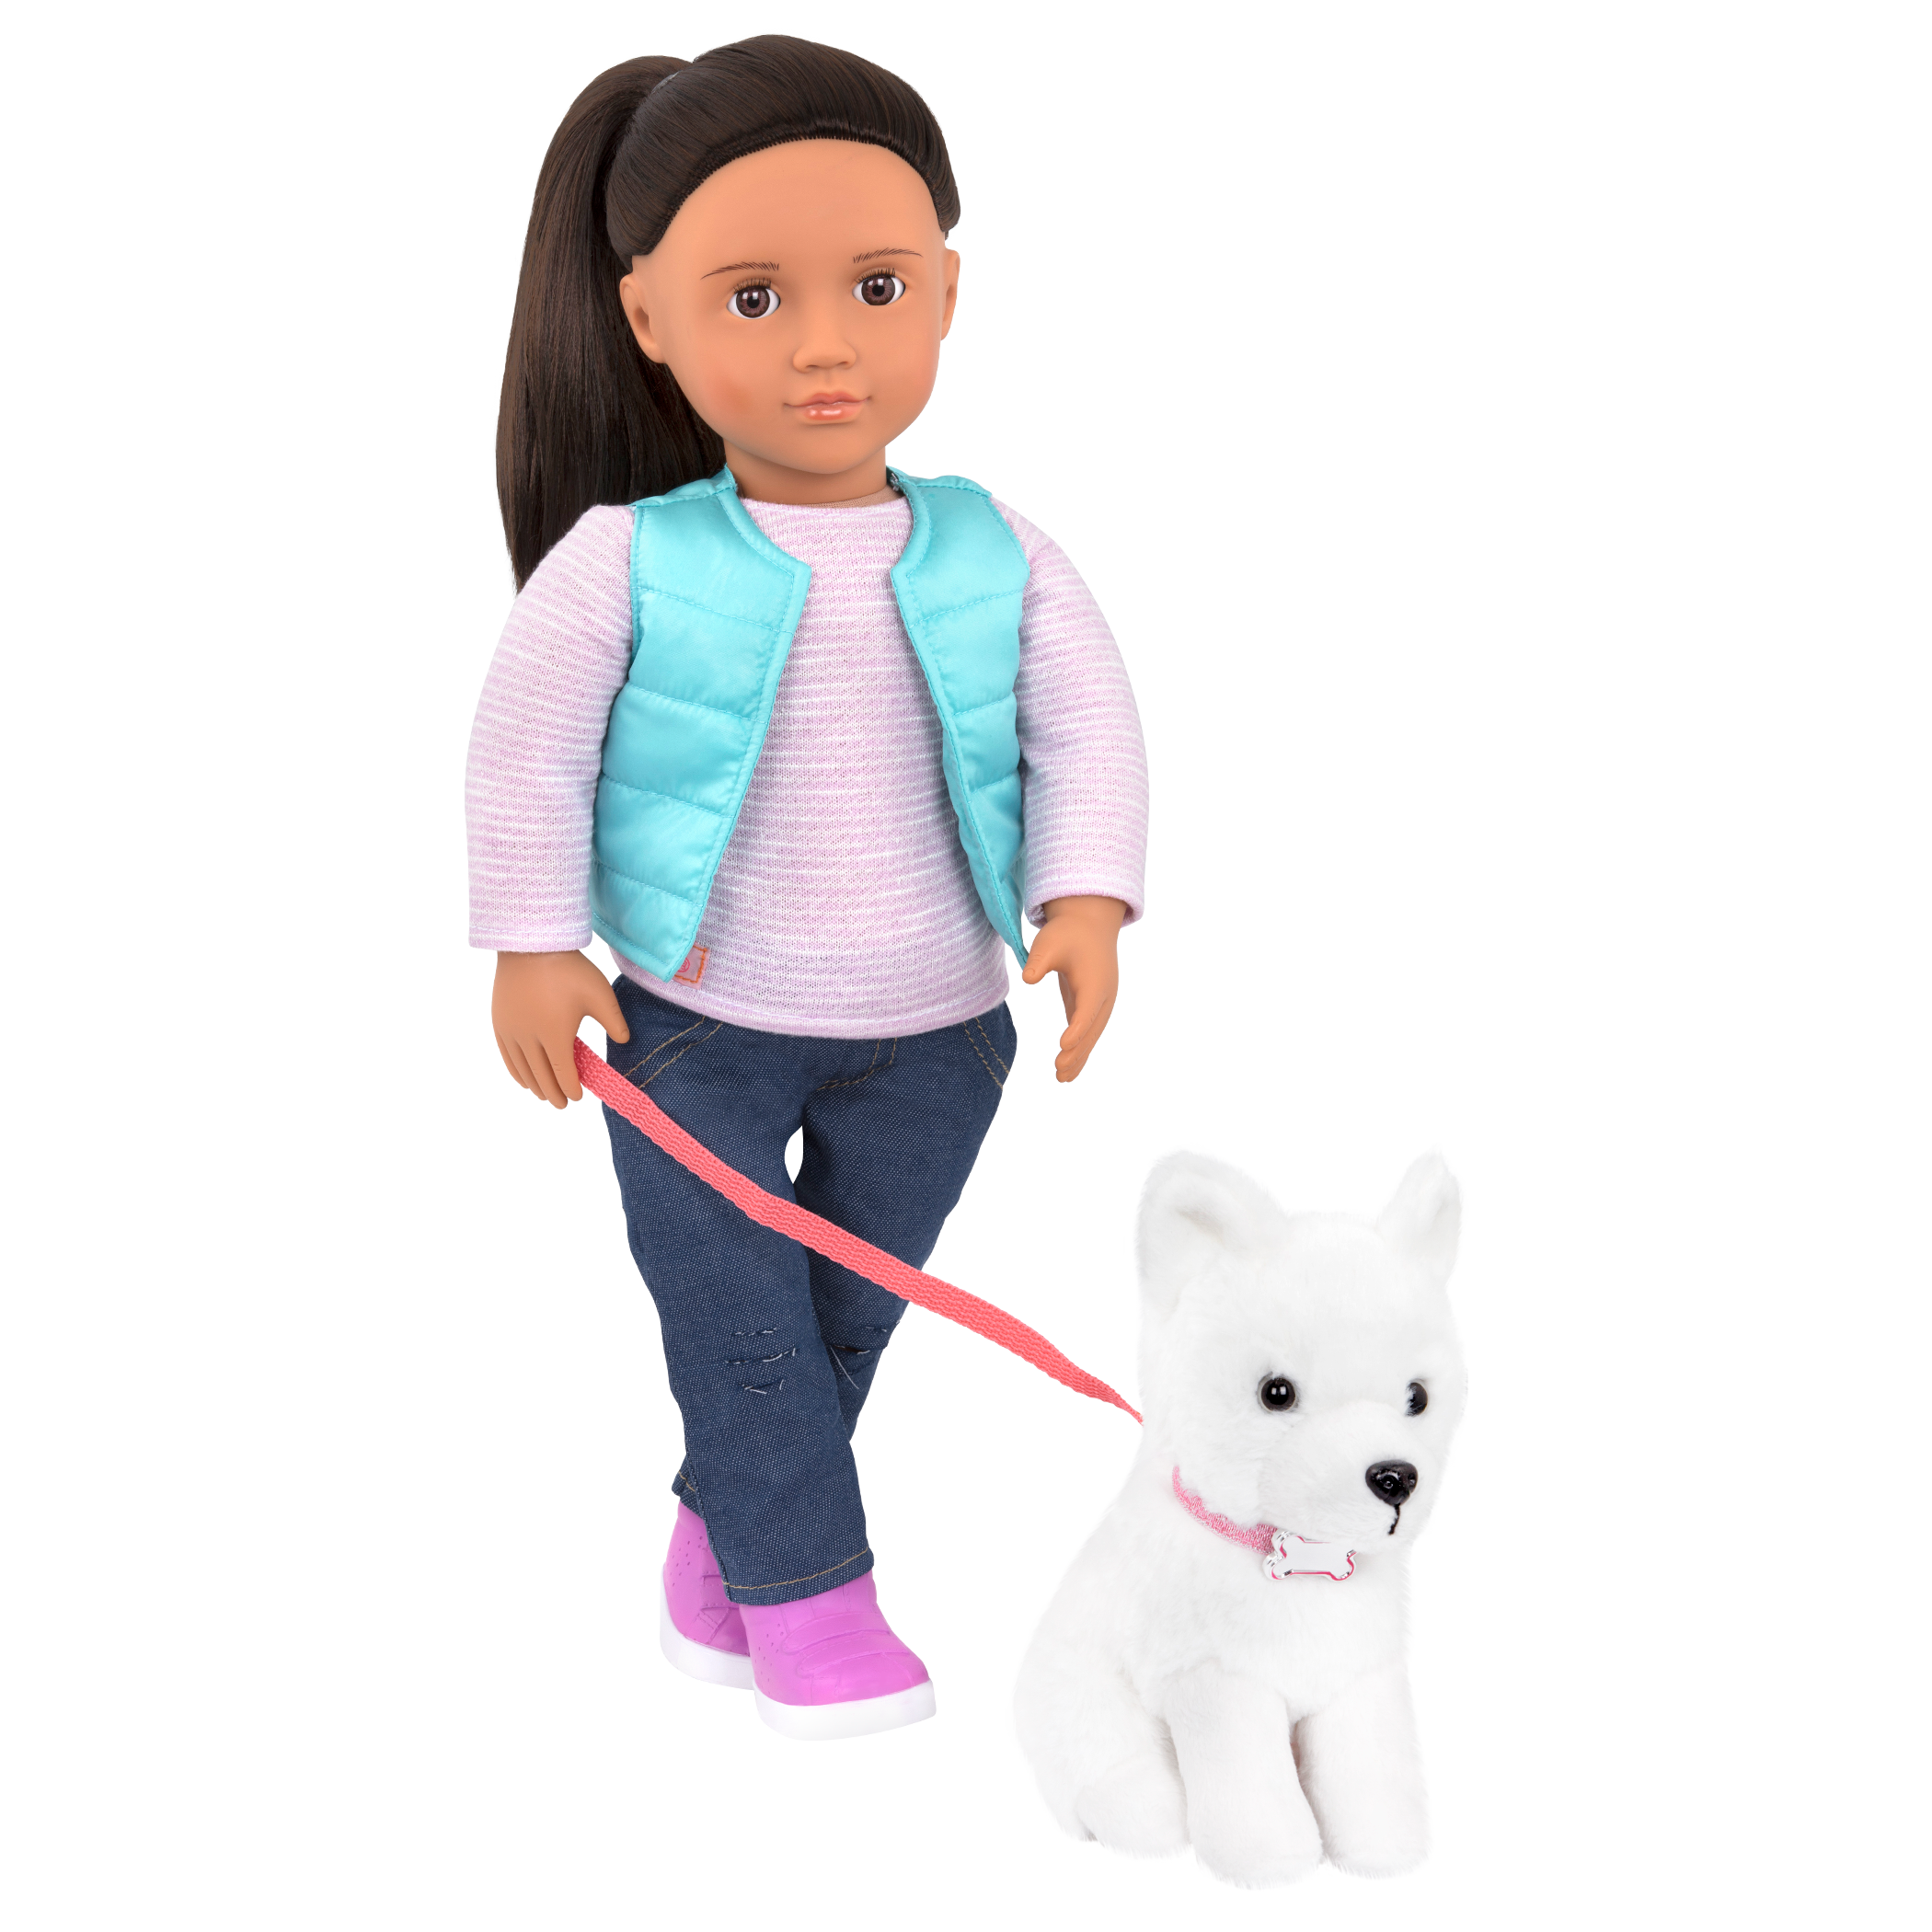 Cassie and Samoyed 18-inch Doll and Pet